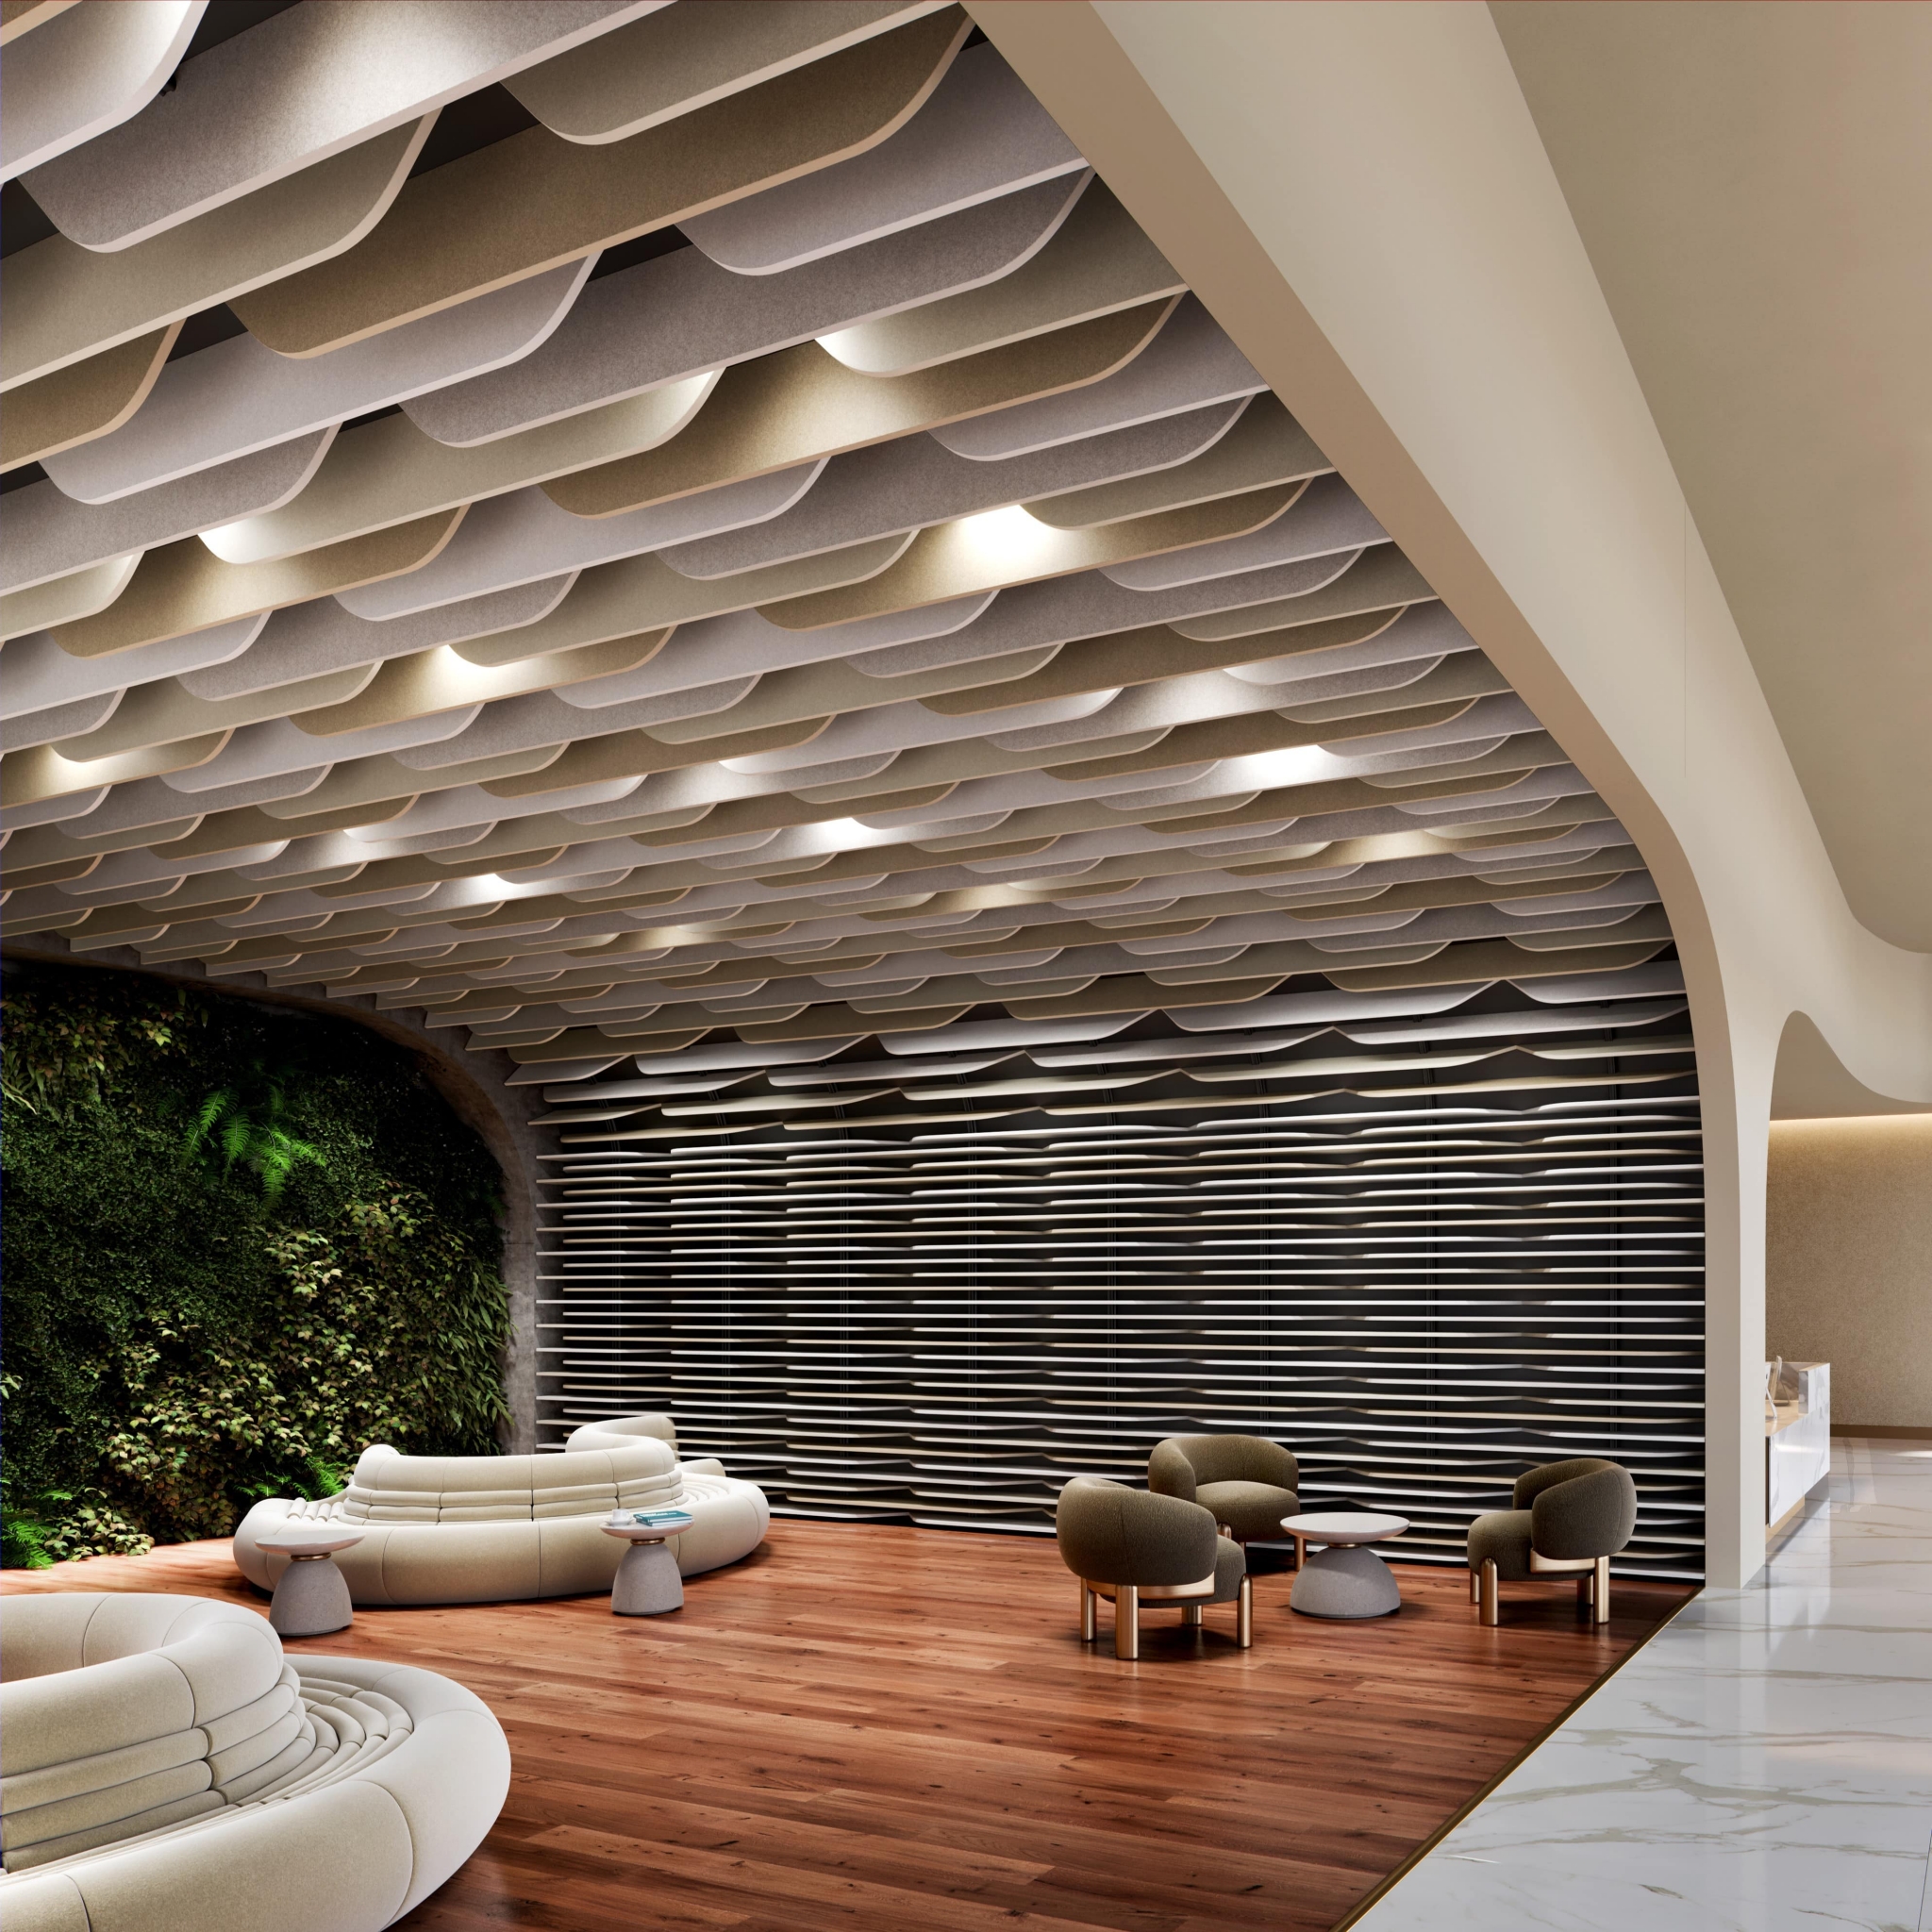 Woven Image introduce Array and Fuji: stunning design-driven acoustic solutions for ceilings